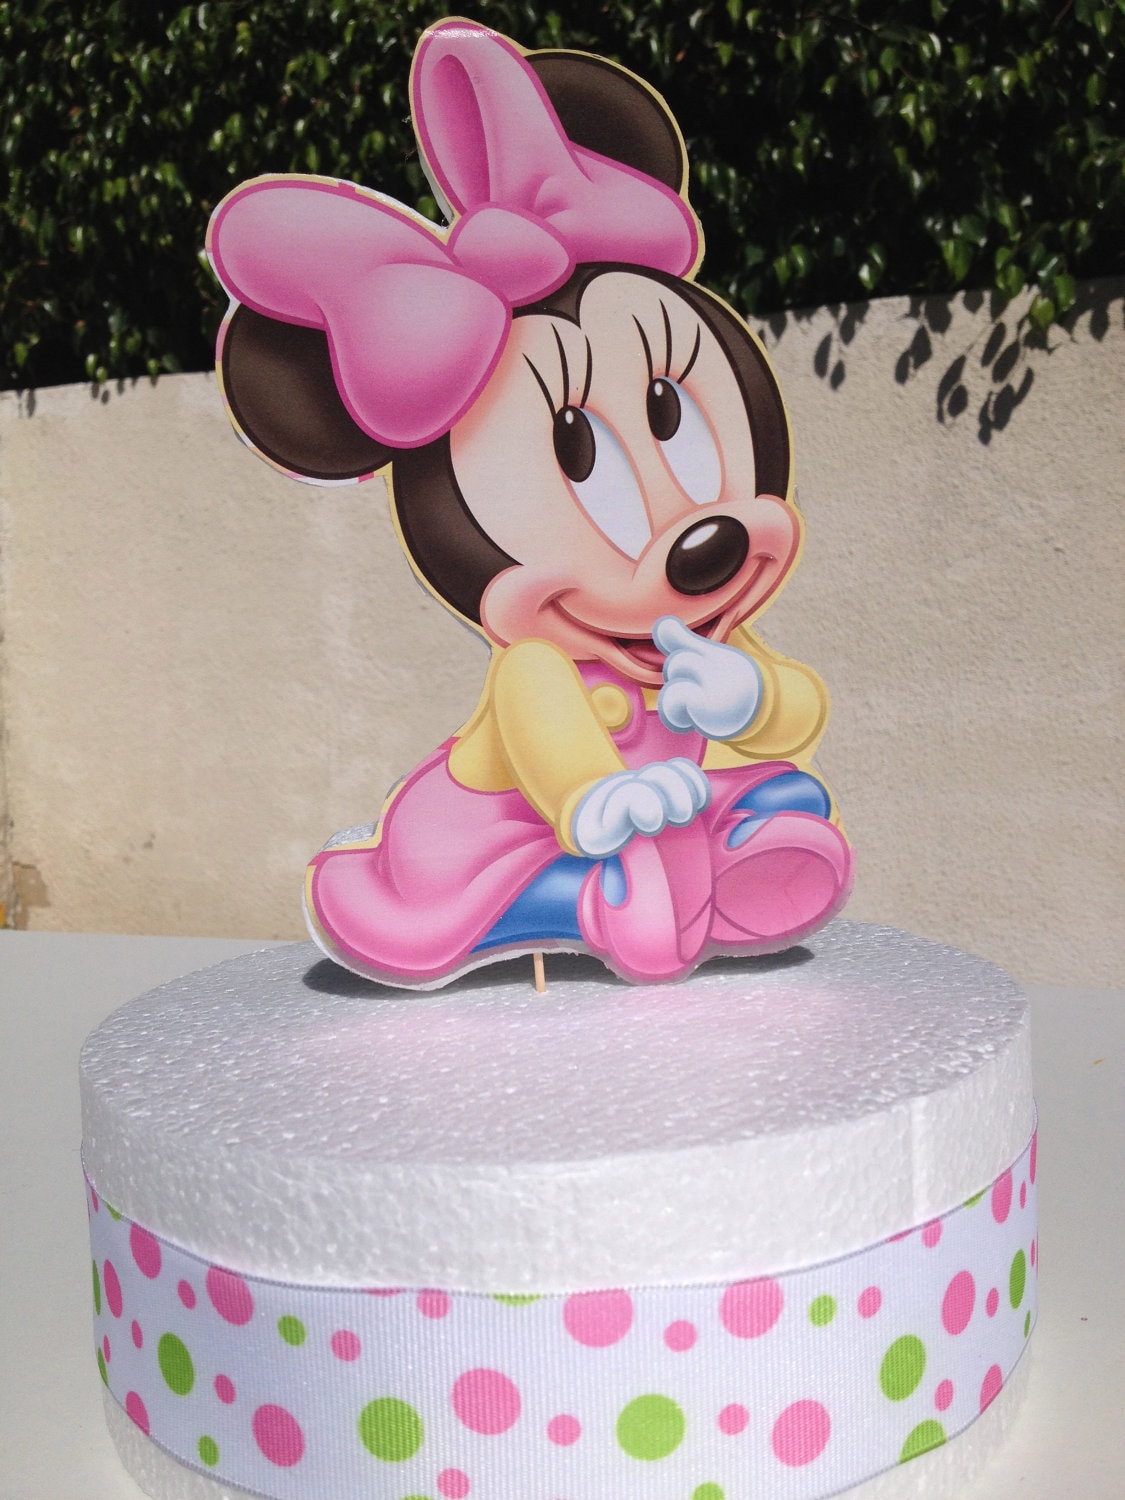 Popular items for minnie mouse cake on Etsy